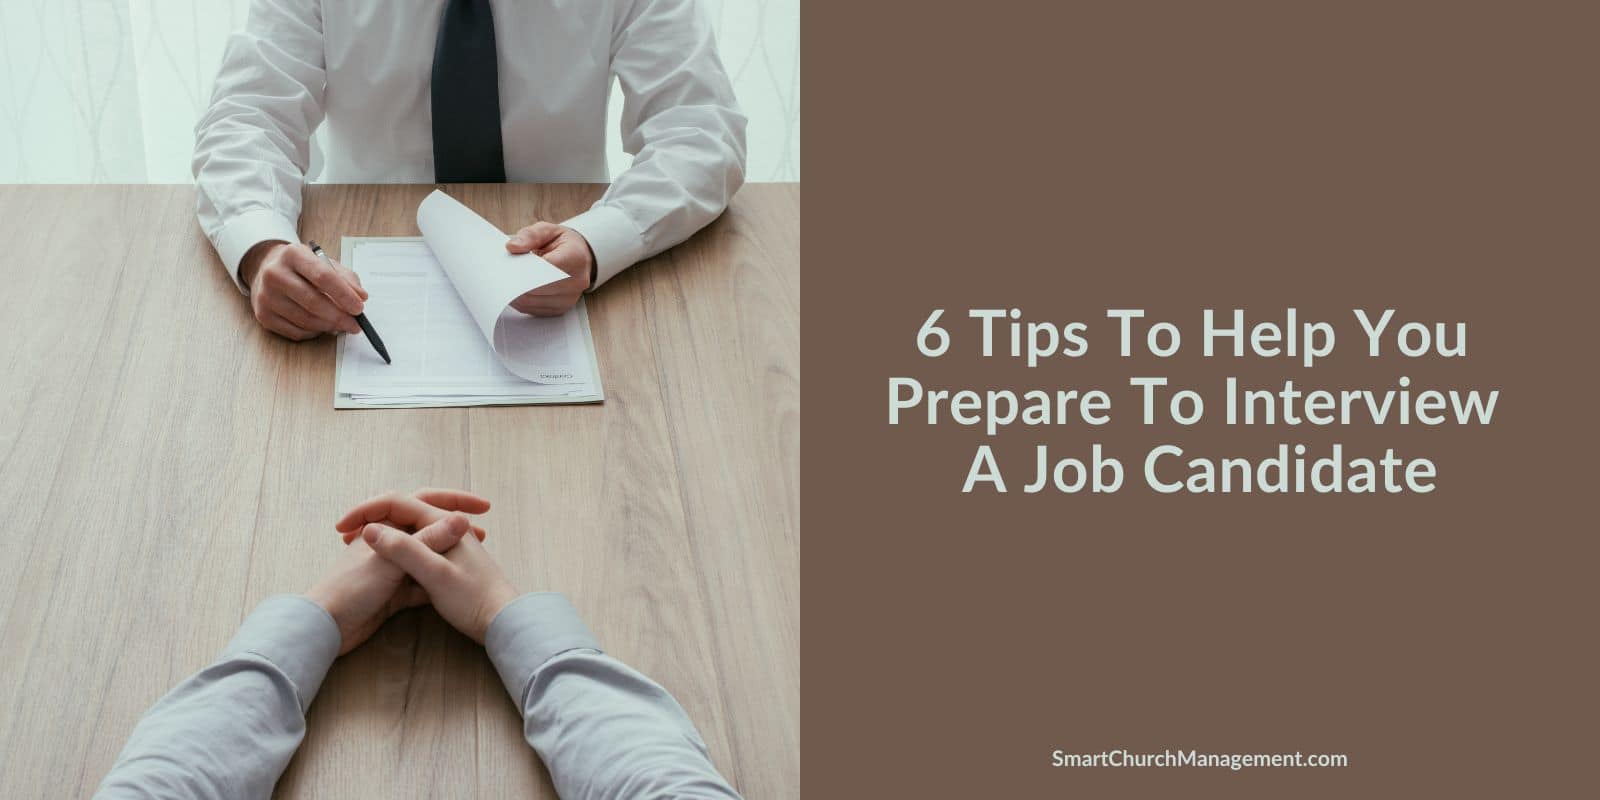 How to prepare to interview a job candidate